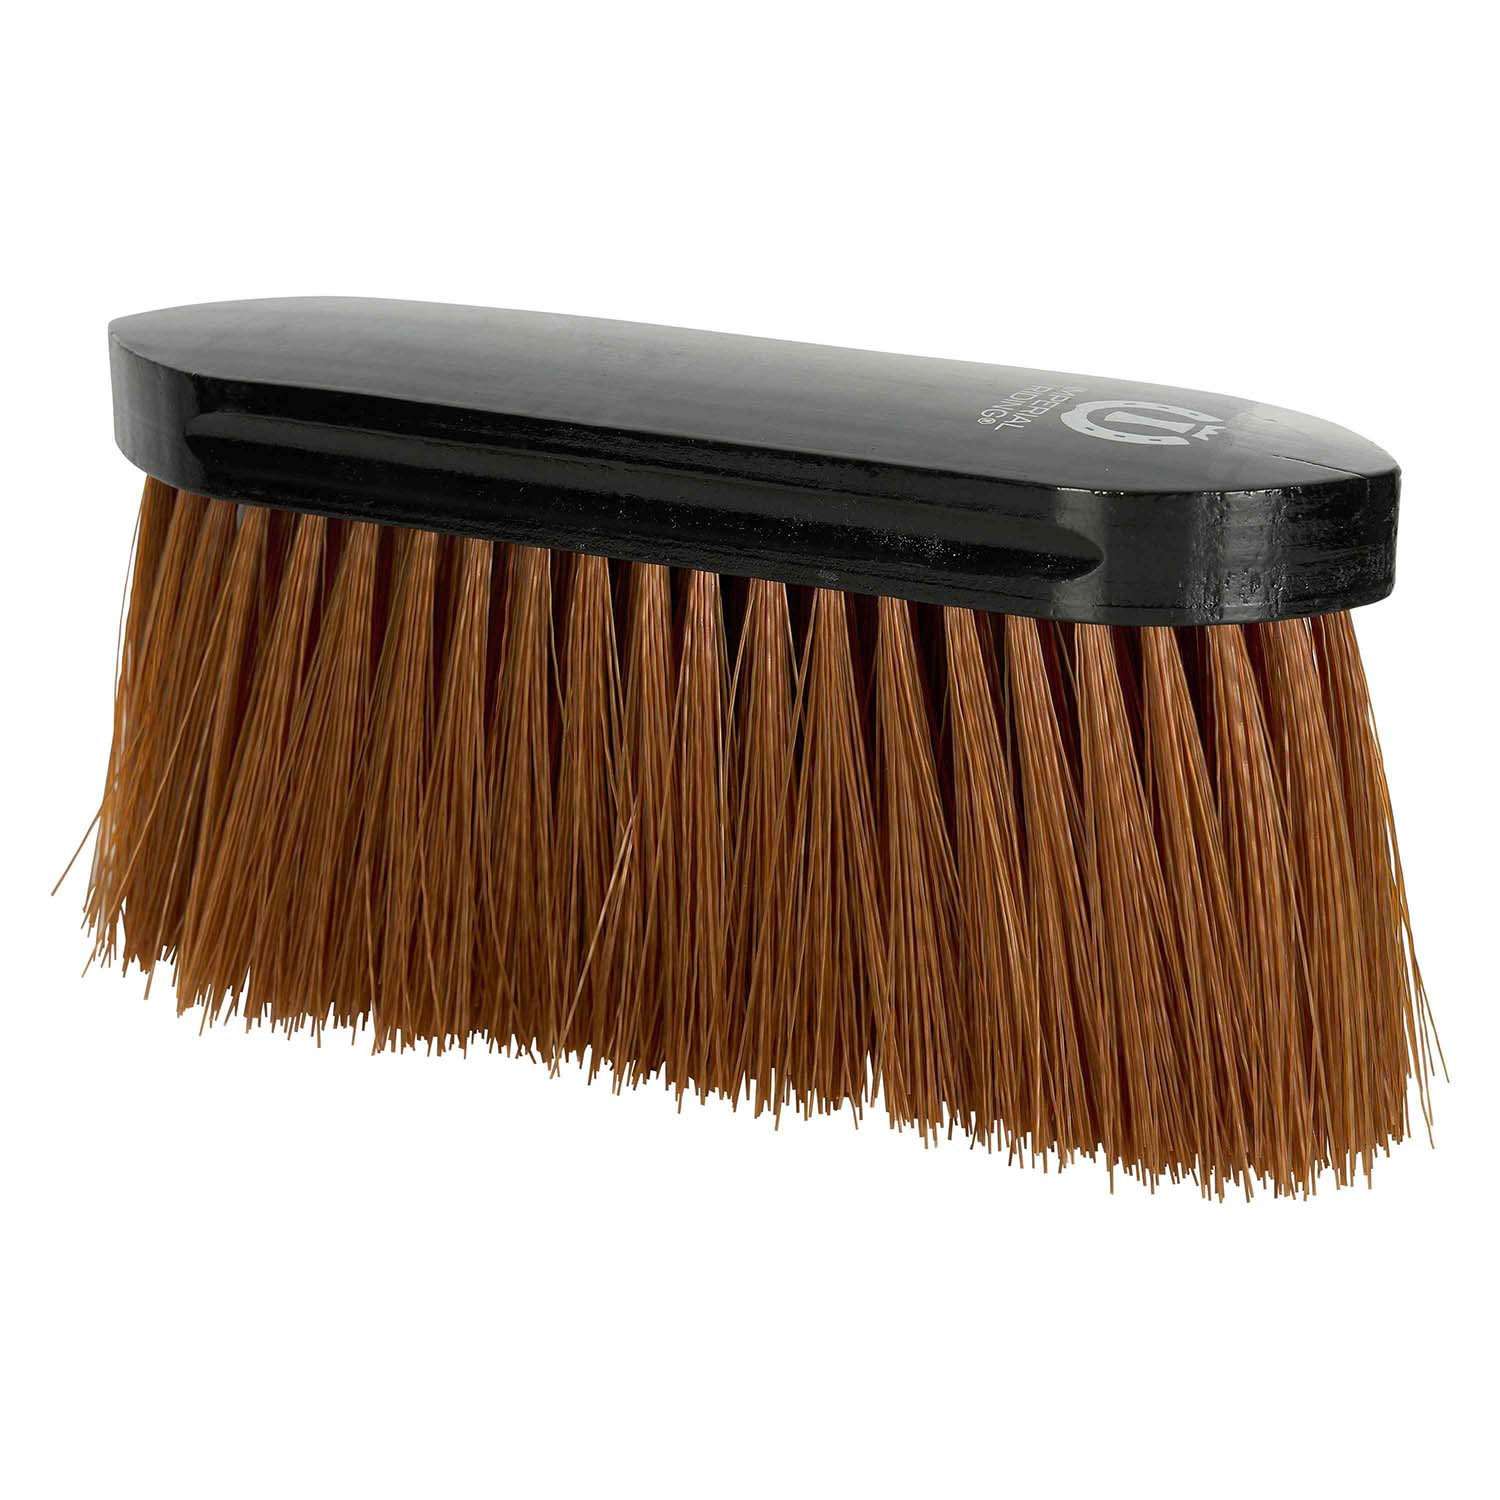 IMPERIAL RIDING DANDY BRUSH LONG HAIR WITH WOODEN BACK